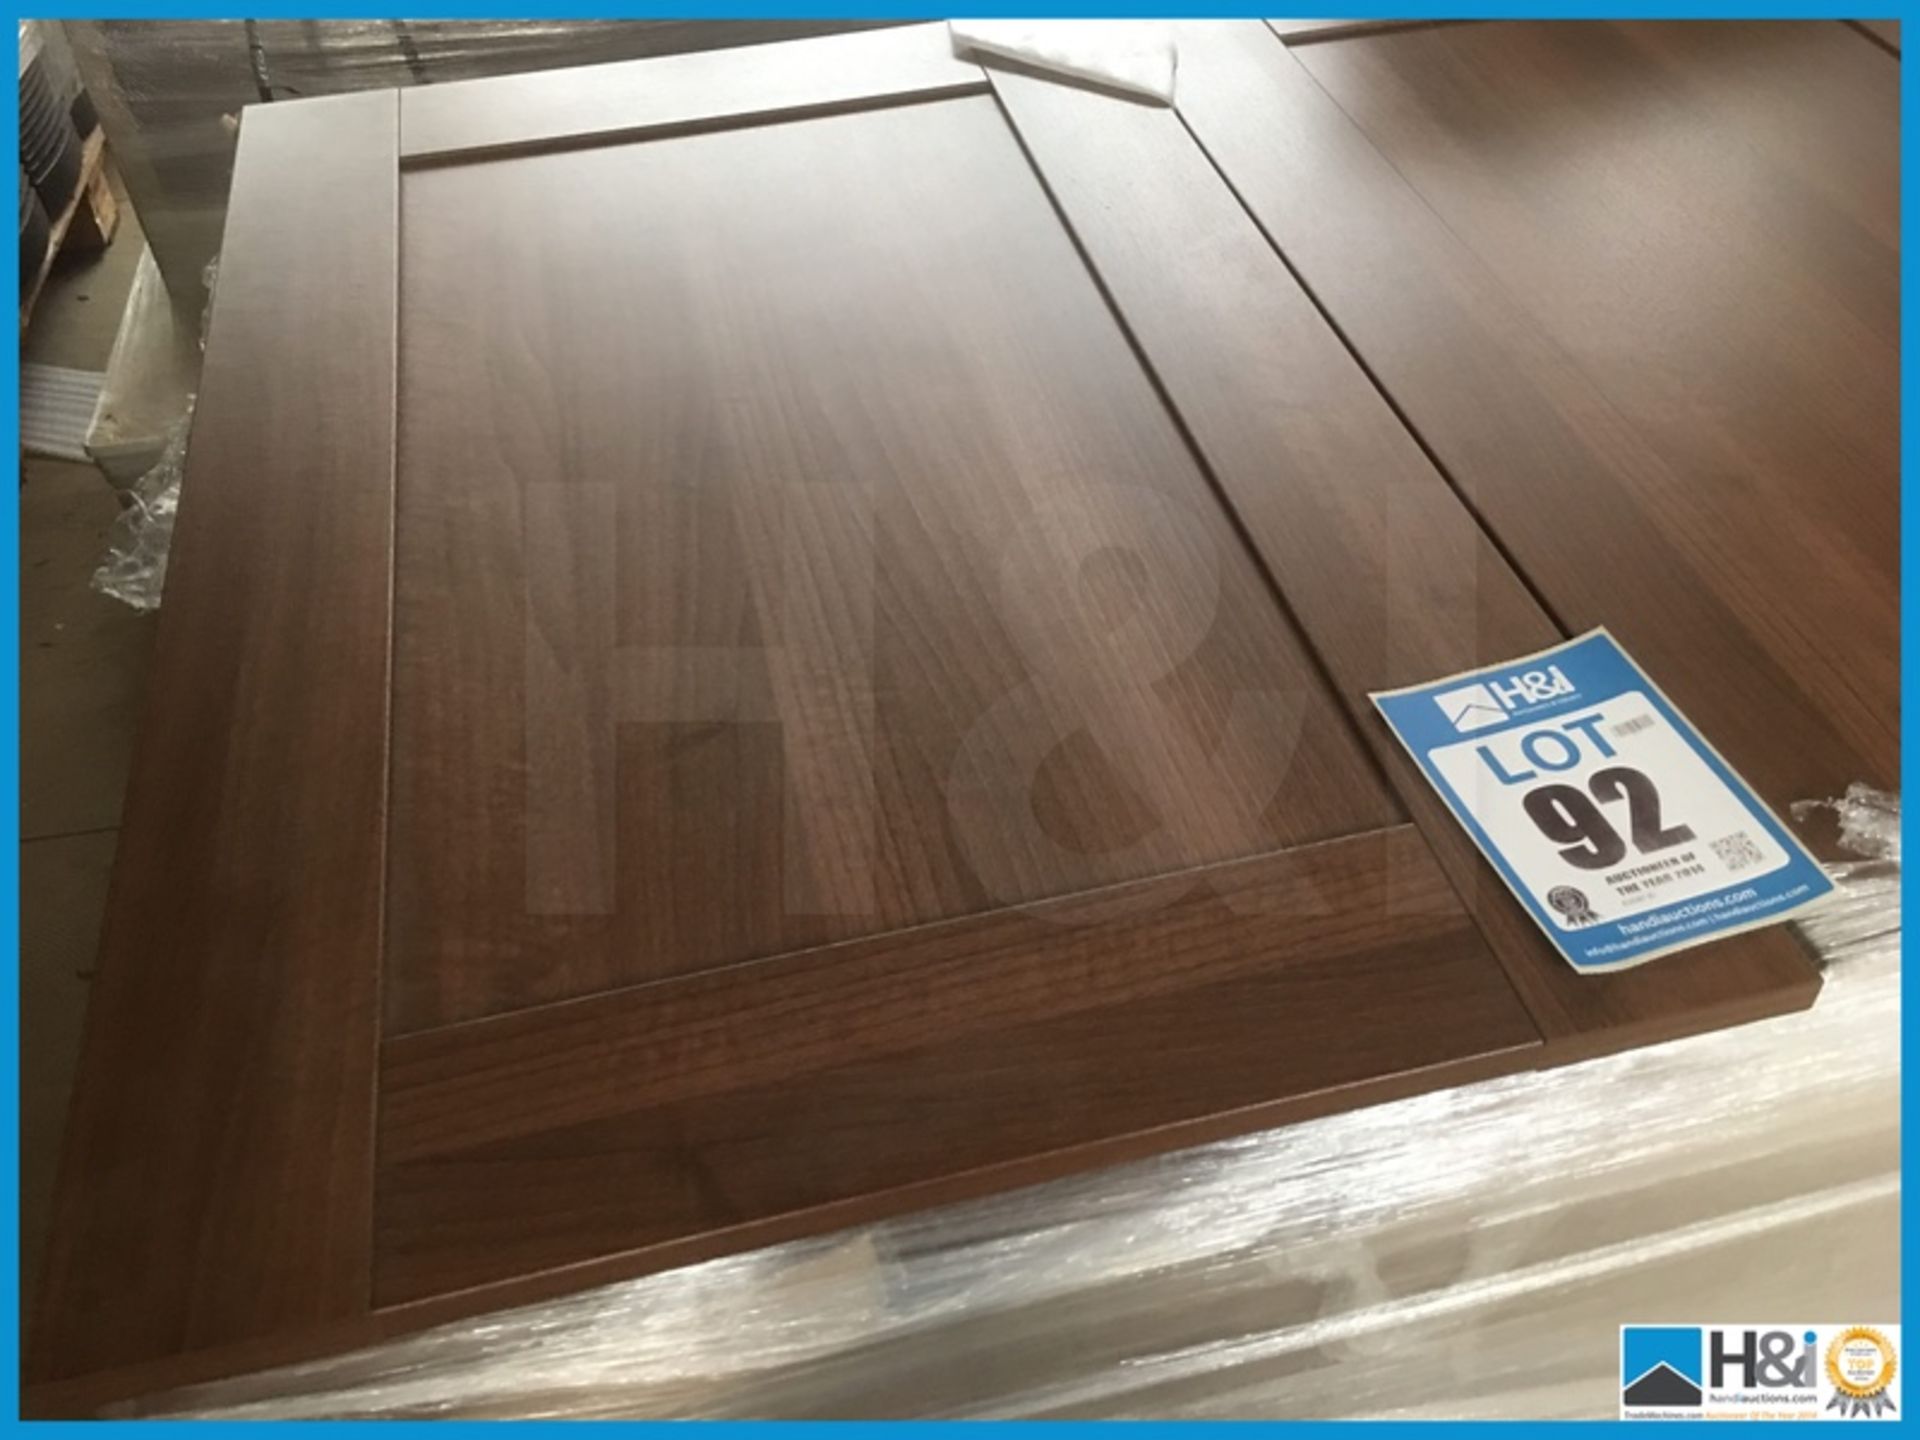 Approx x 50 895mm X 995 mm American walnut contemporary kitchen door with retail value of lot £2950. - Image 2 of 3